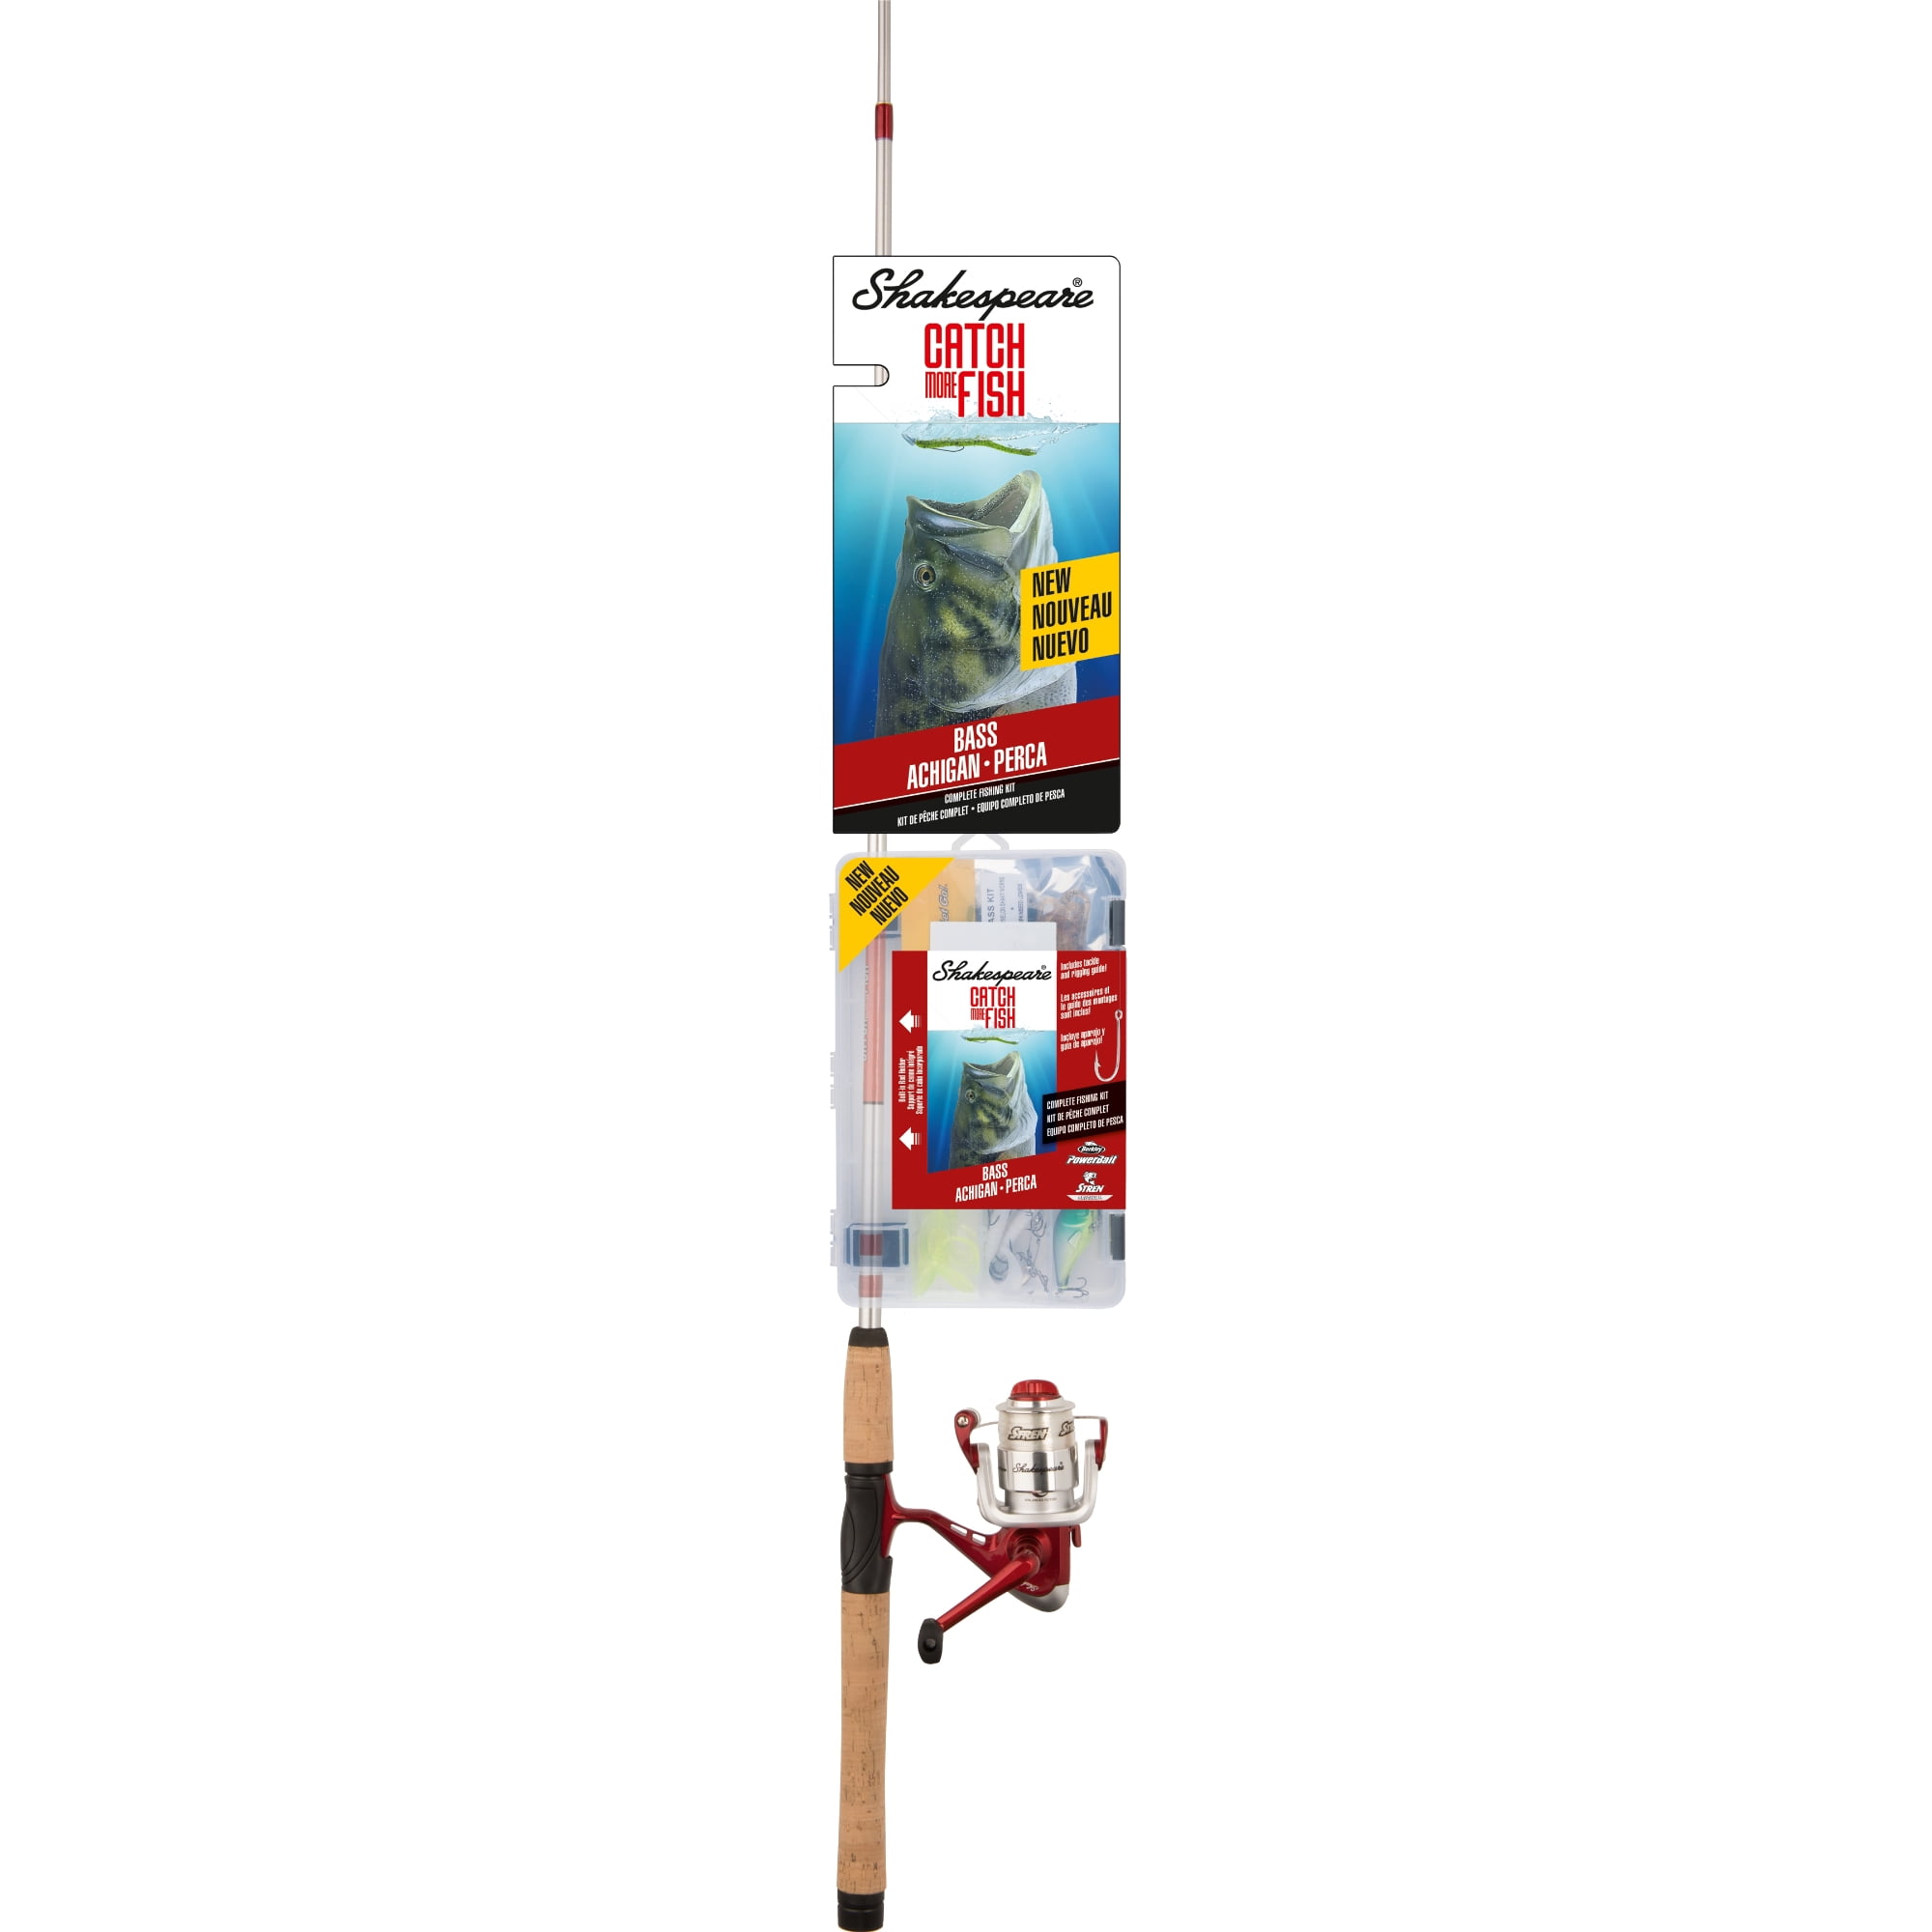 Shakespeare Catch More Fish 2 Kits 2pc 